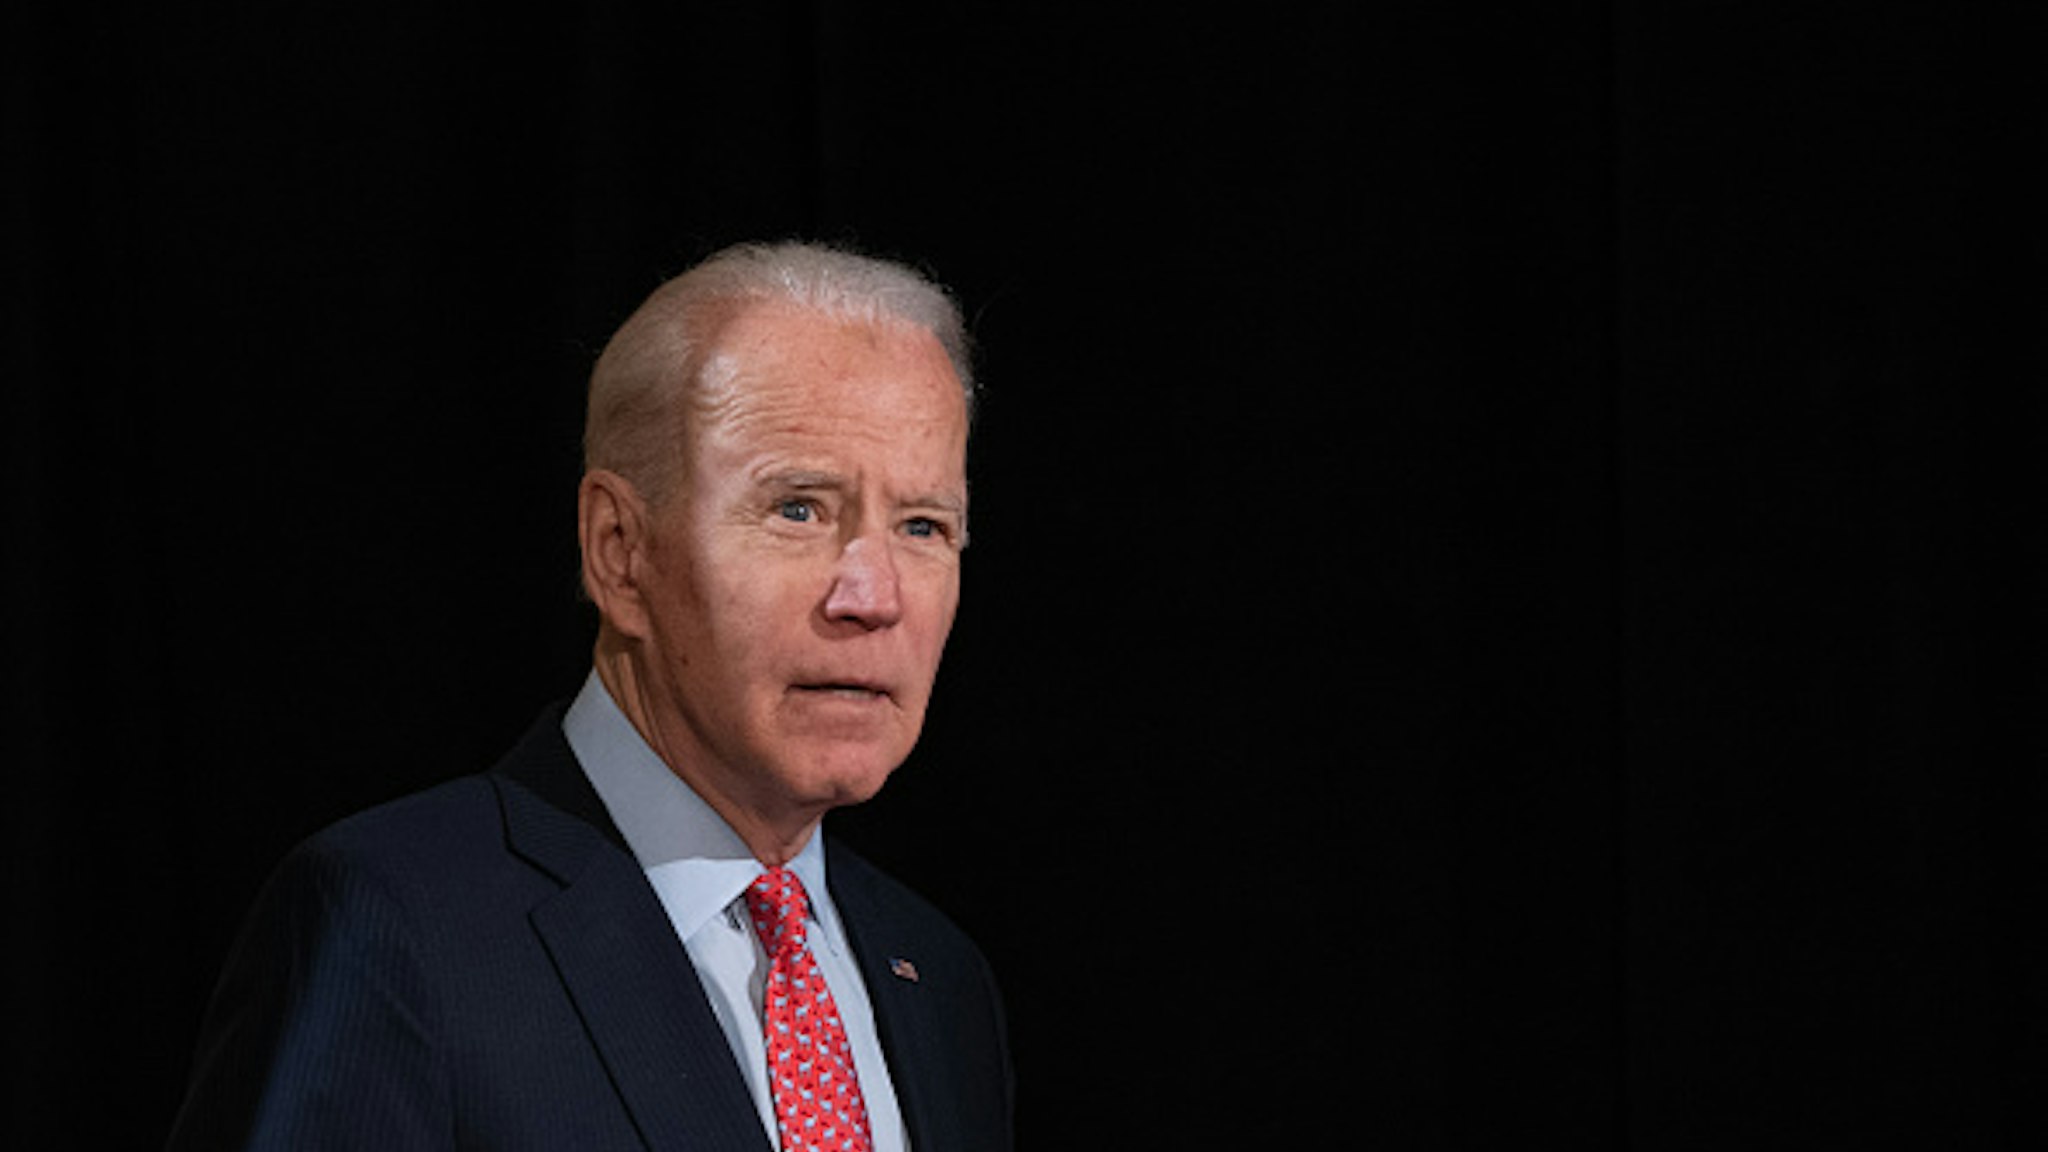 Former US Vice President and Democratic presidential hopeful Joe Biden arrives to speak about COVID-19, known as the Coronavirus, during a press event in Wilmington, Delaware on March 12, 2020